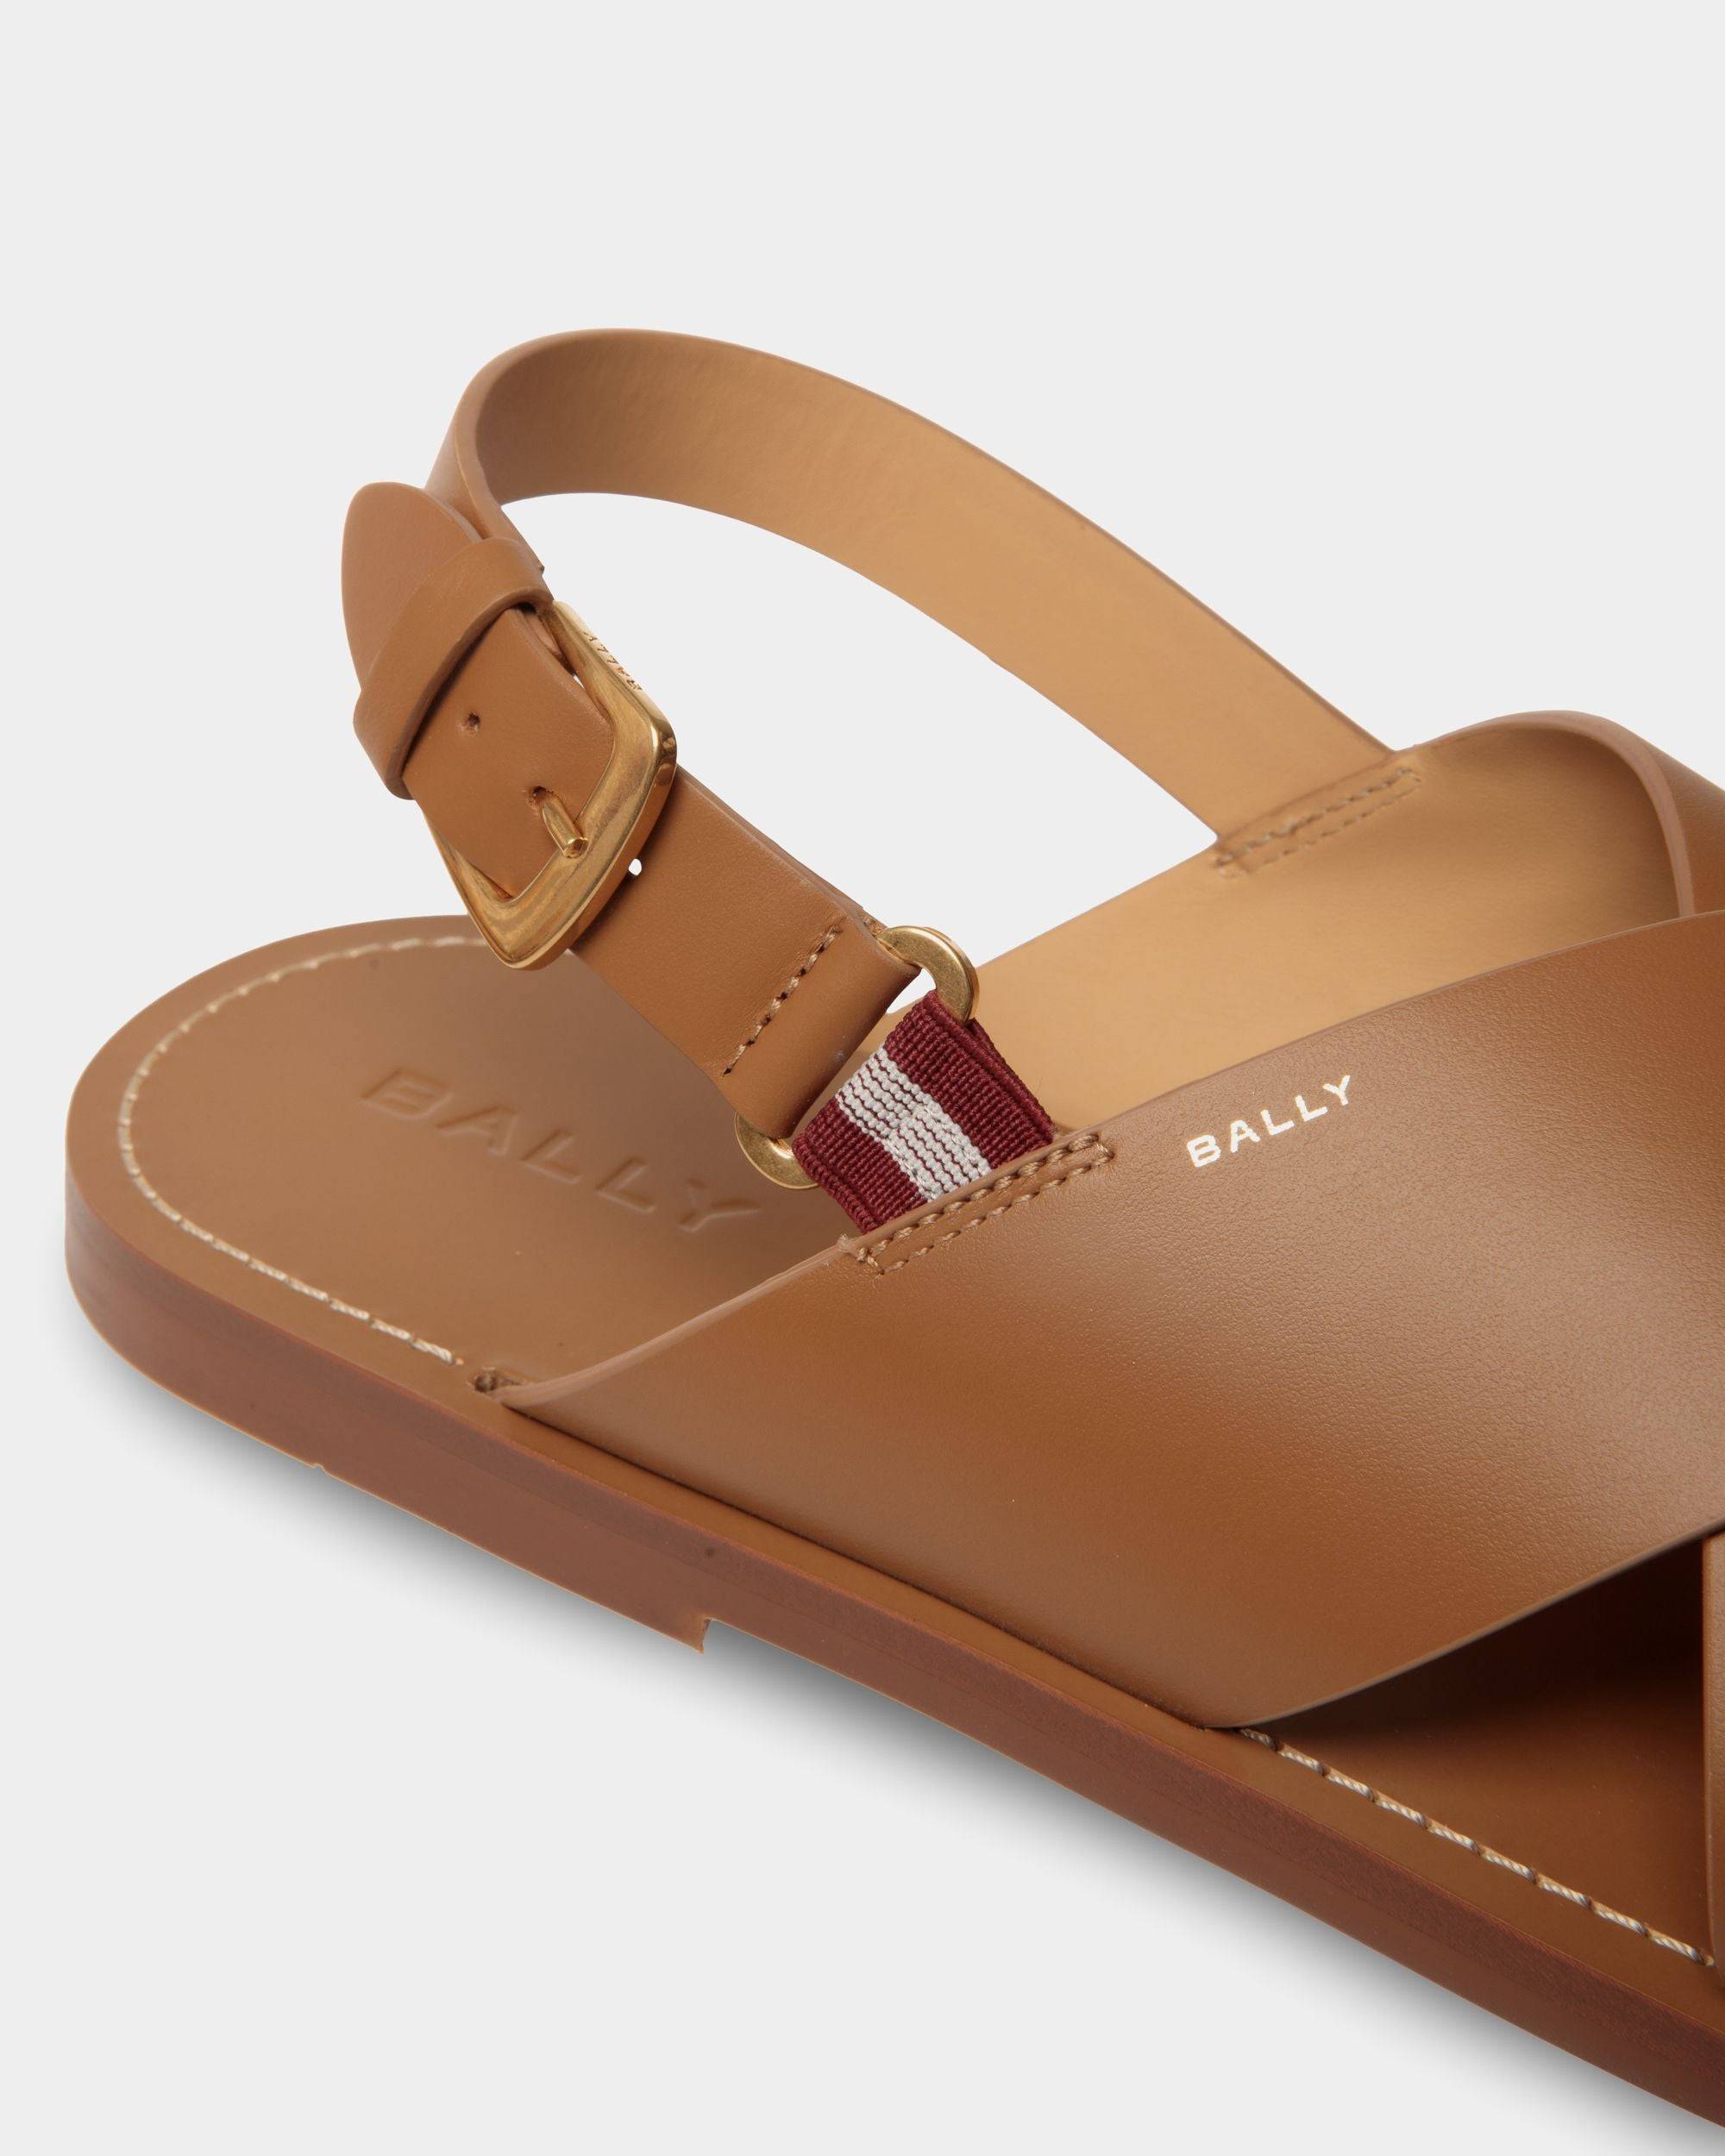 Chateau Sandal in Brown Leather - Men's - Bally - 05